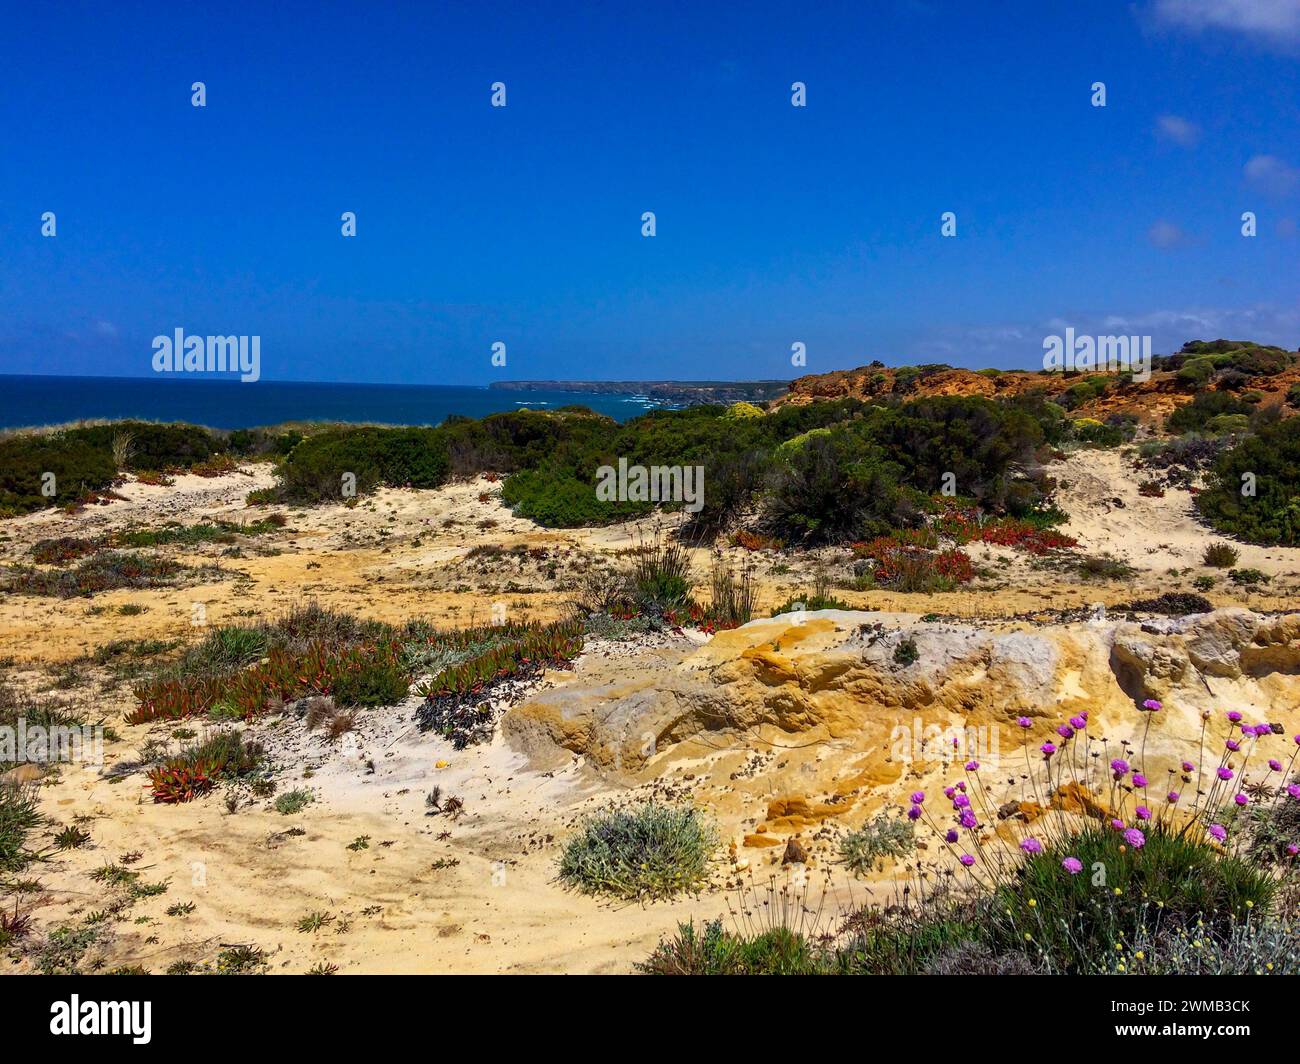 The image captures a coastal landscape with sandy terrain, green shrubs, and purple flowers. The blue ocean and sky are visible in the background. Stock Photo